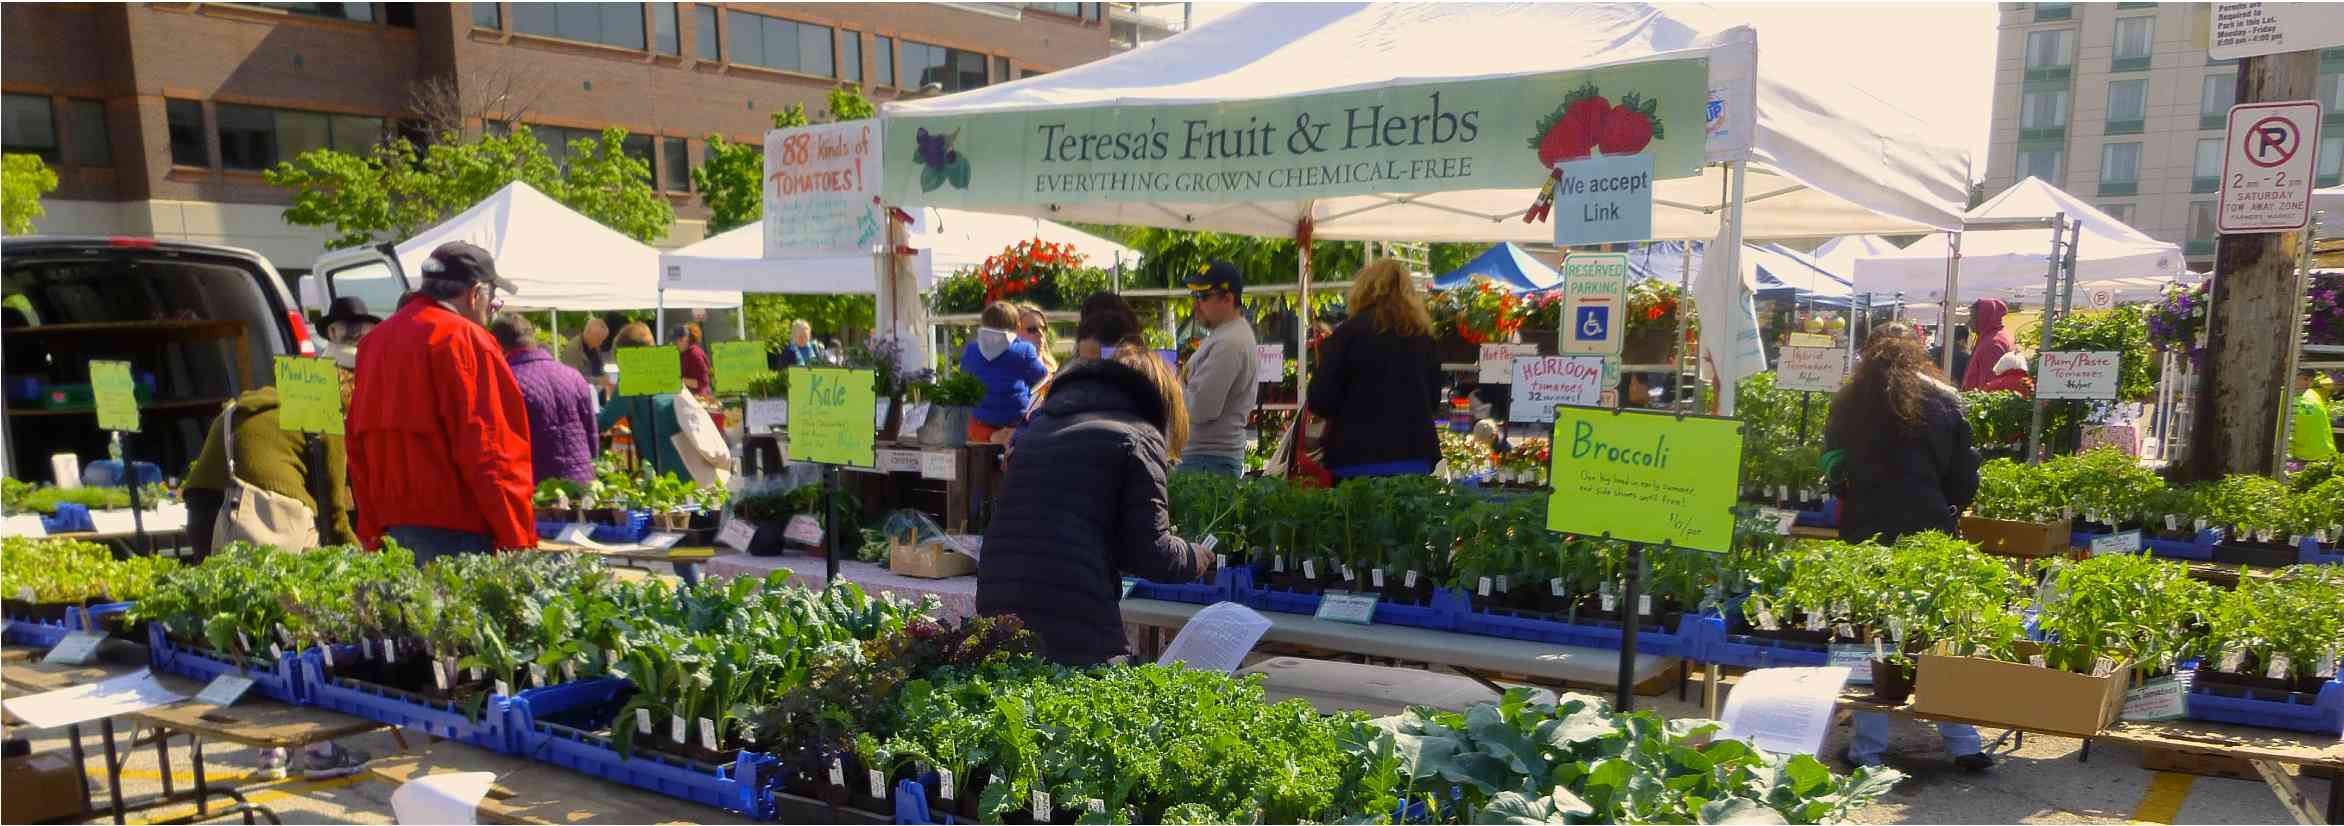 Teresa's Fruit and Herb Stand at Evanston Farmers Market showing plant starts, photo by Peter Laundy